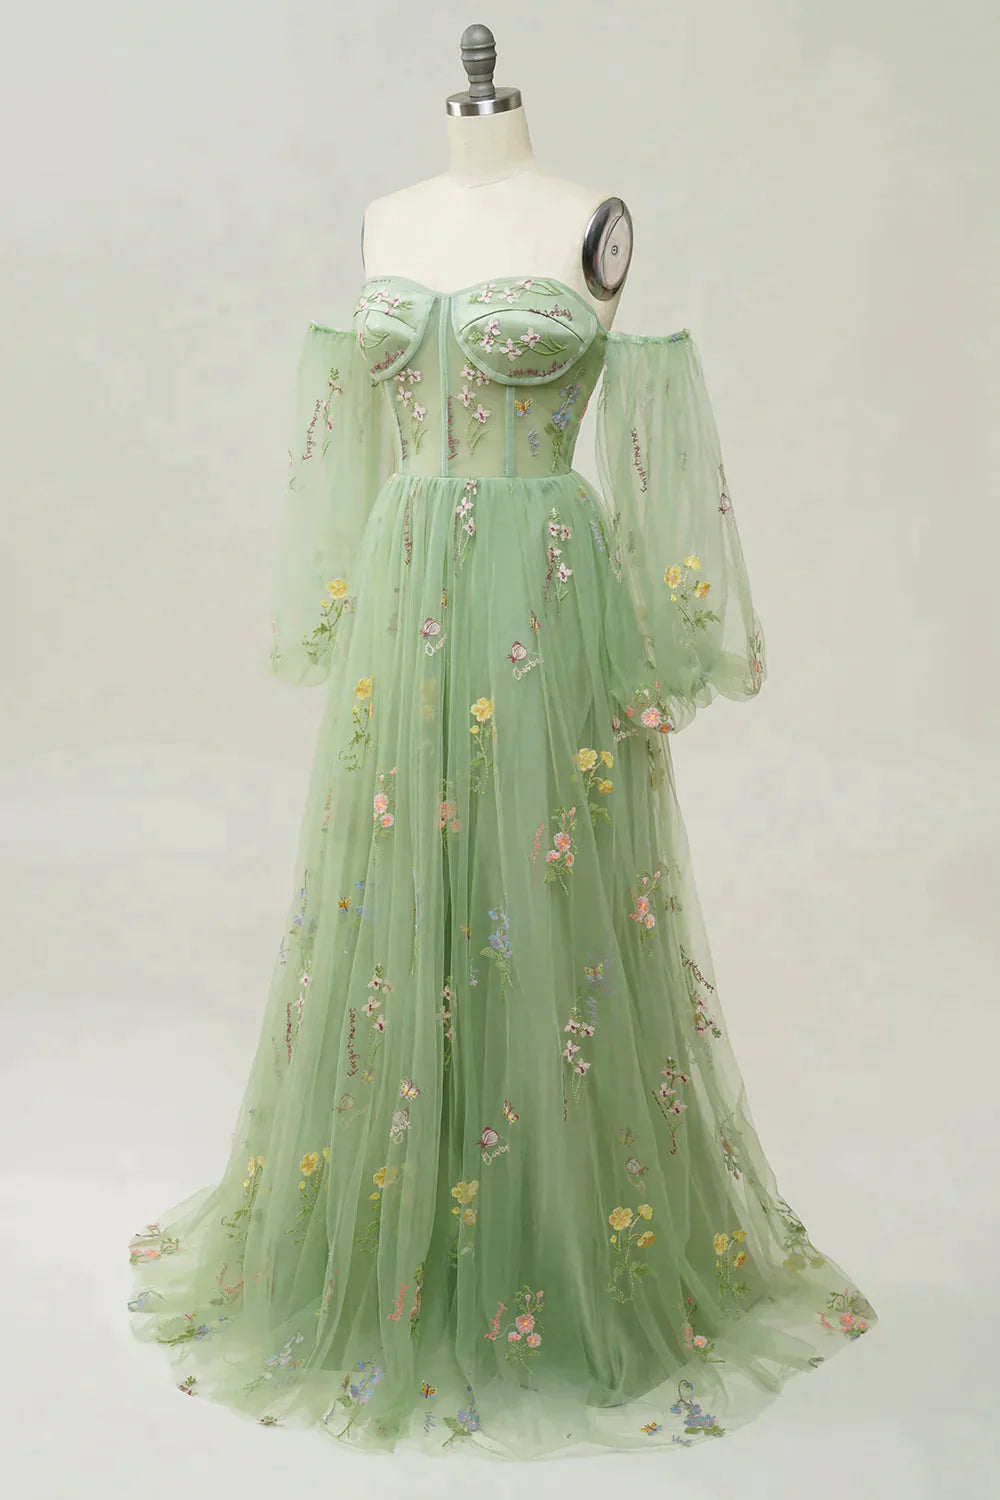 Green Off The Shoulder Long Sleeves A-Line Corset Prom Dress With Embroidery Gowns, Evening Dress Long Elegant